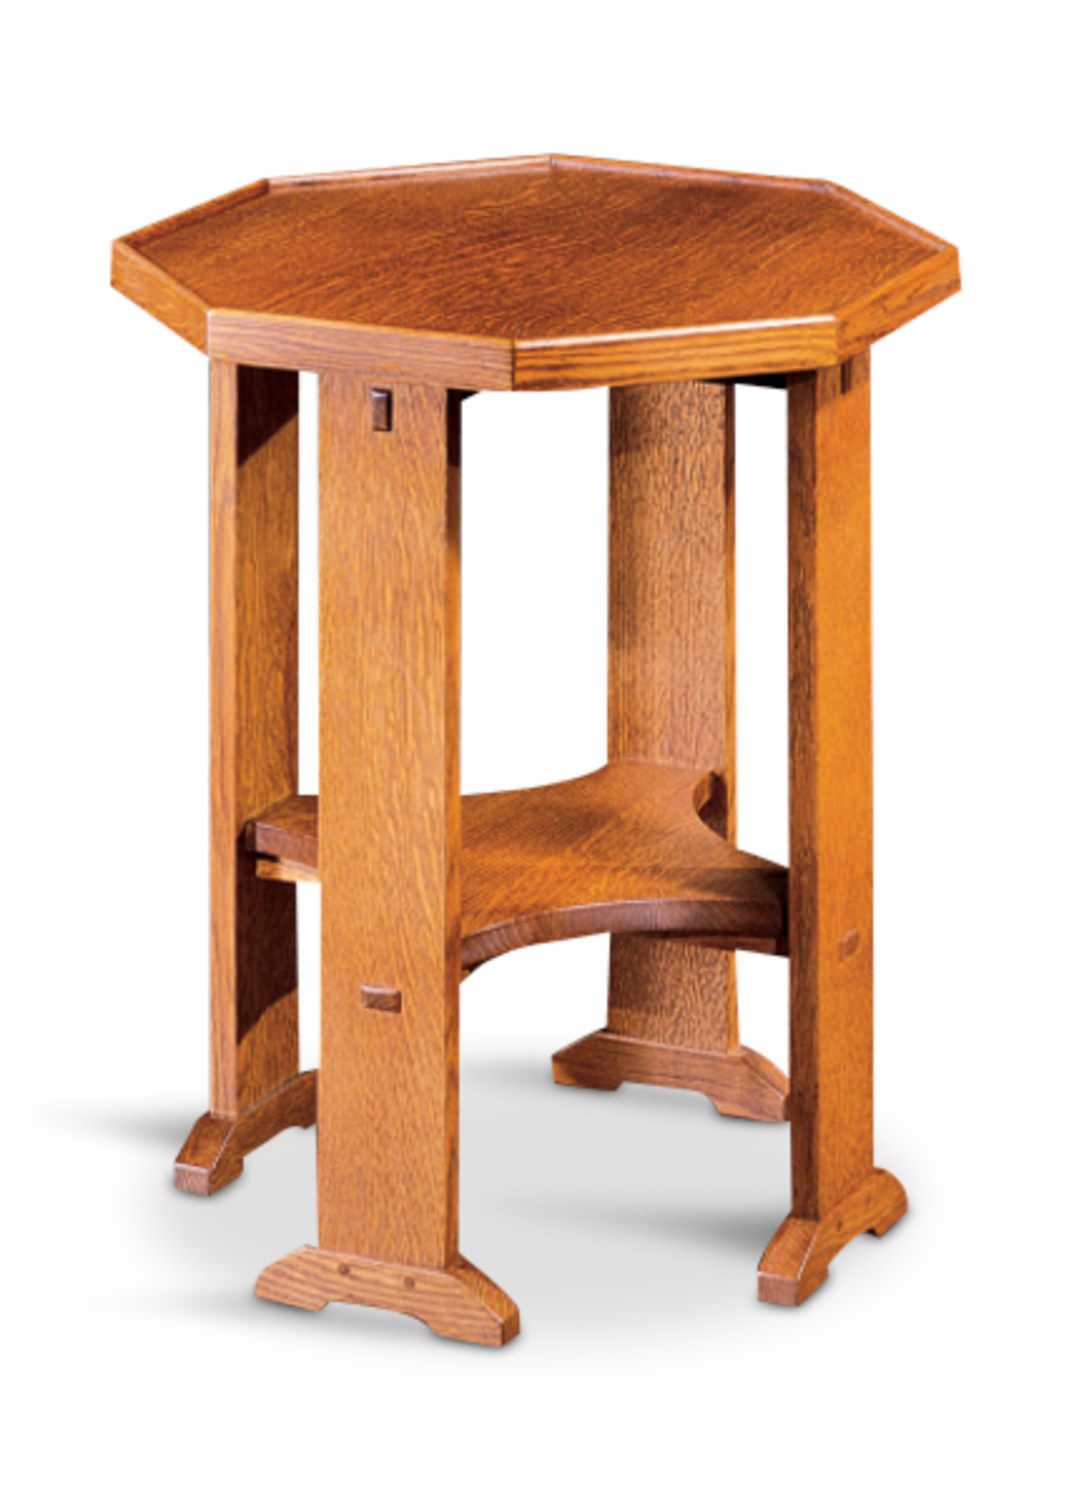 Octagonal Tablestickley | Gabberts With Regard To Octagon Console Tables (View 12 of 20)